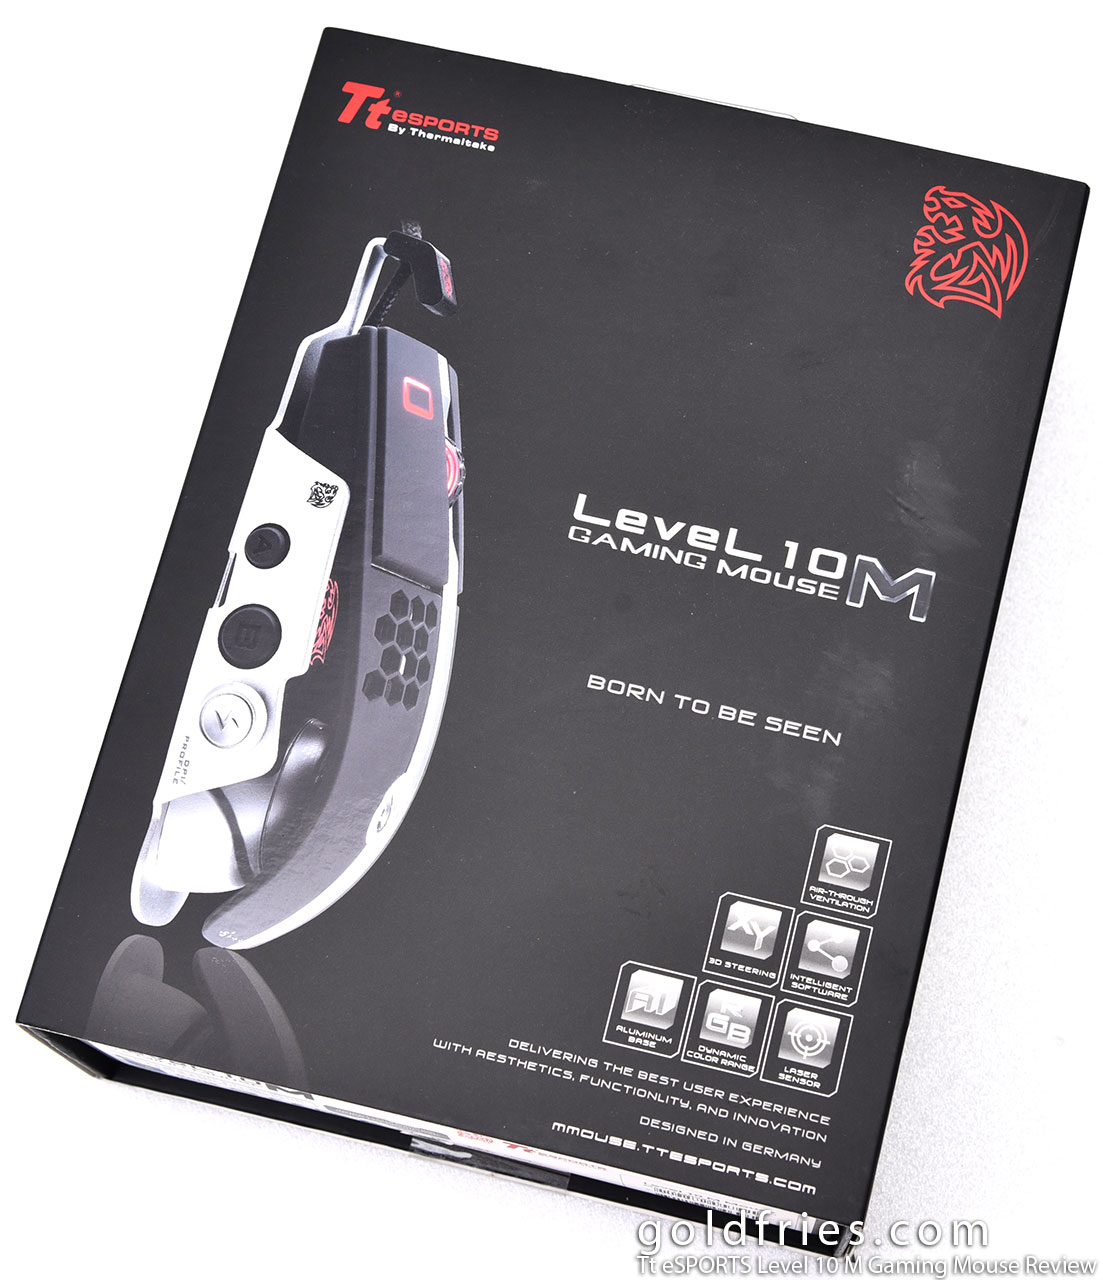 Tt eSPORTS Level 10 M Gaming Mouse Review